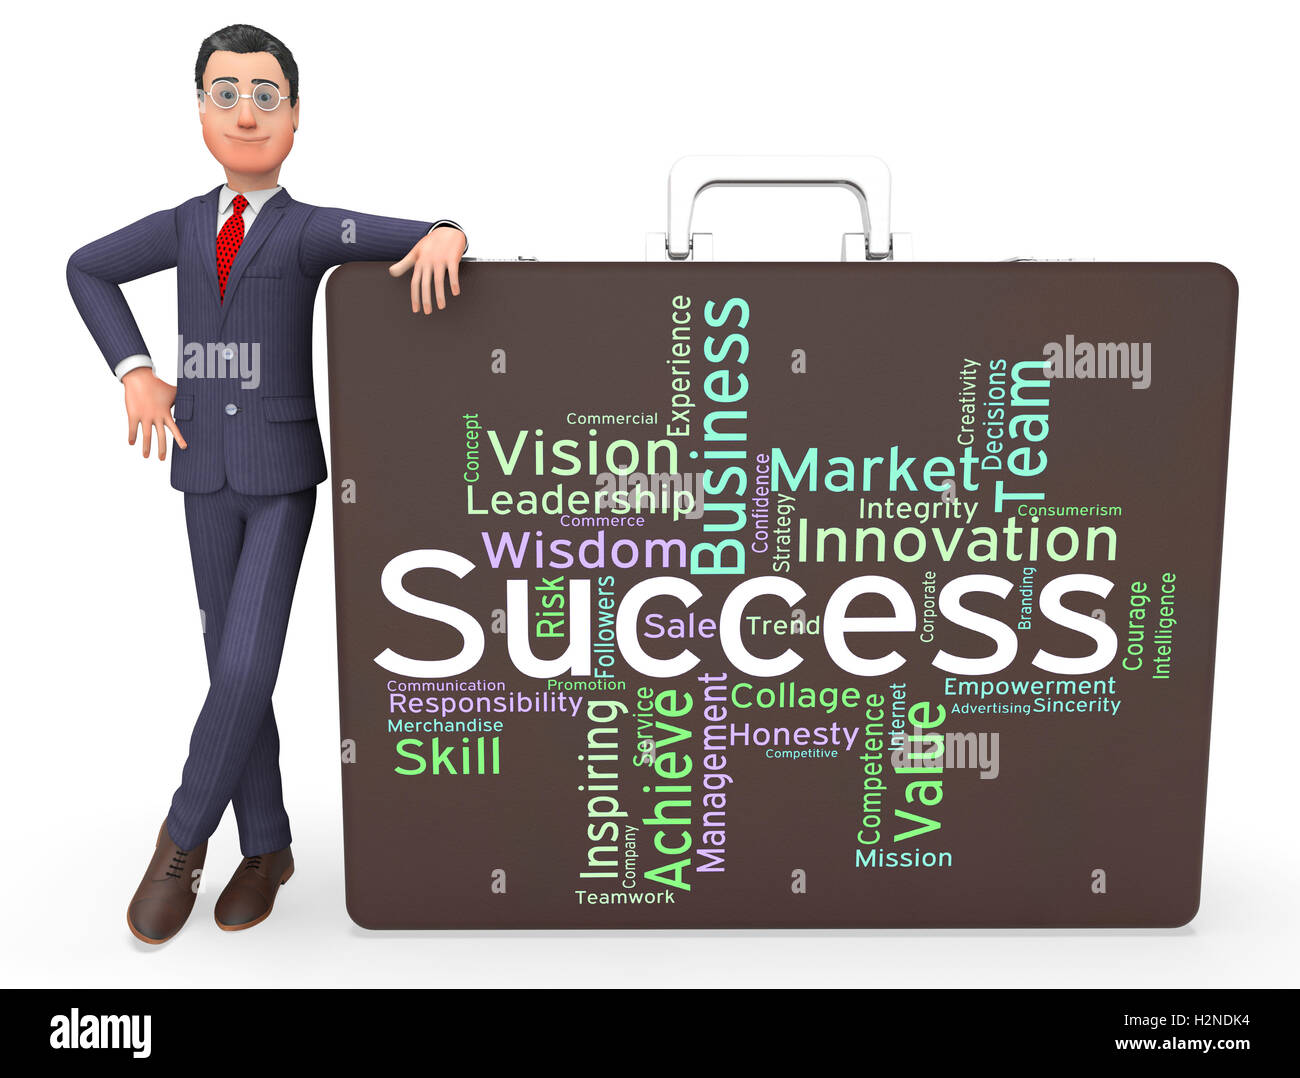 Success Words Meaning Succeed Triumph And Text Stock Photo